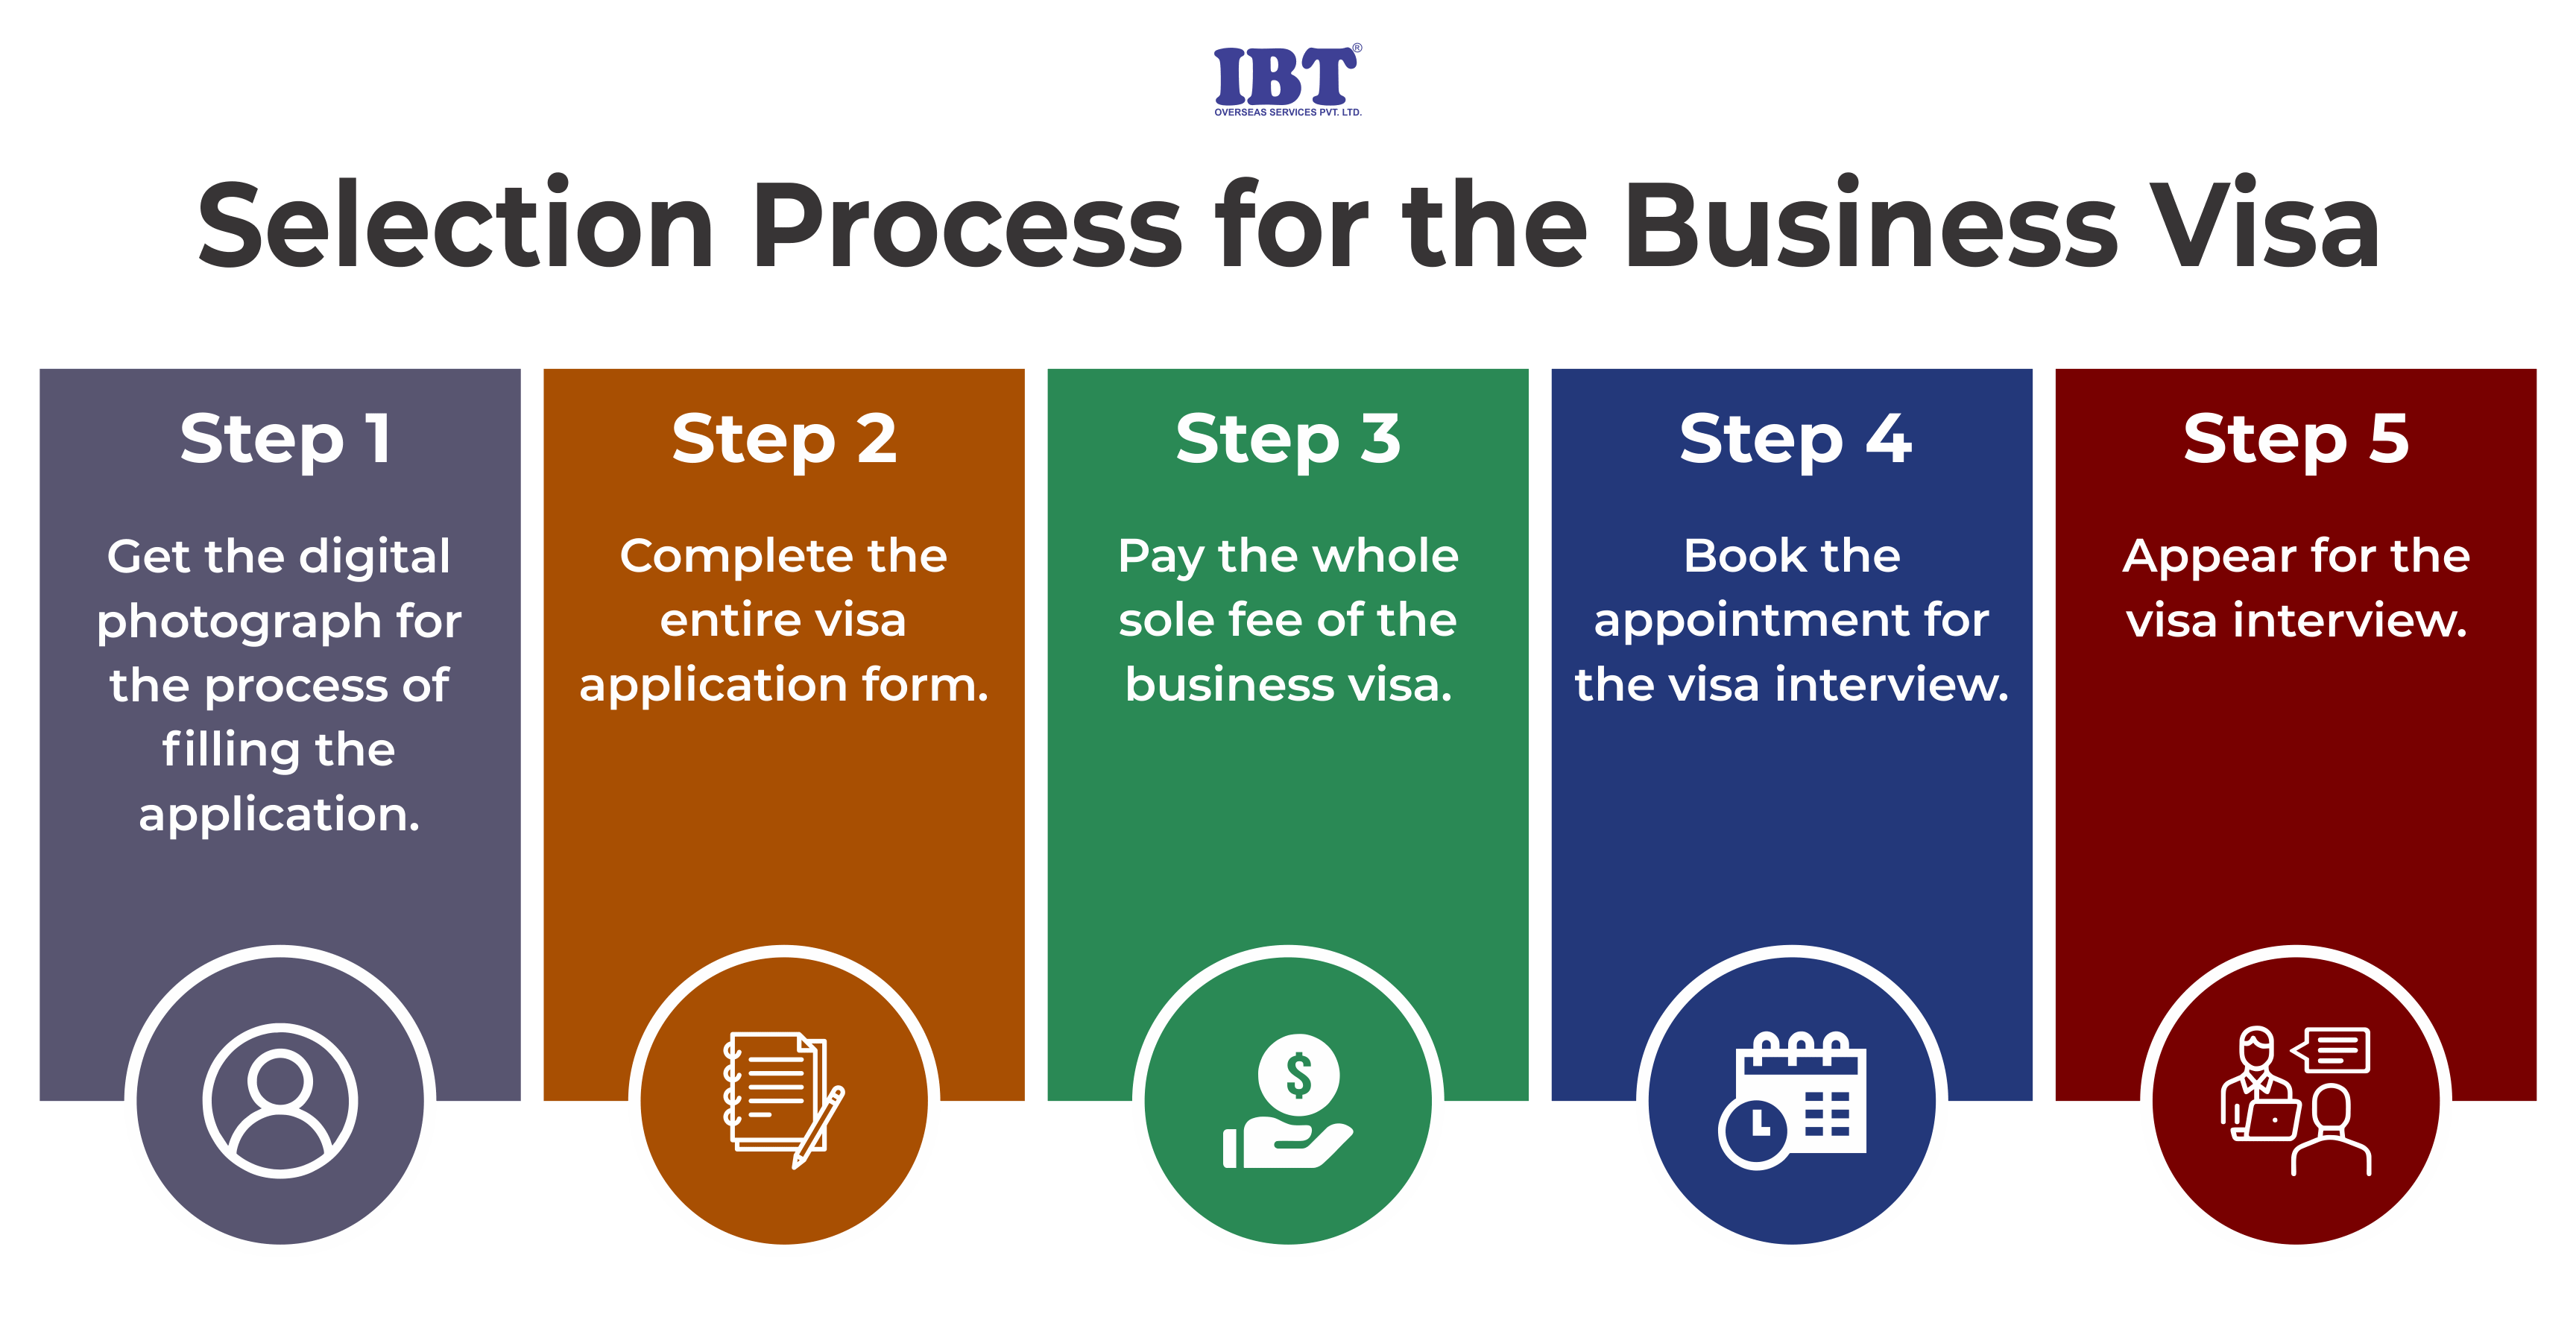 Selection Process for Business Visa